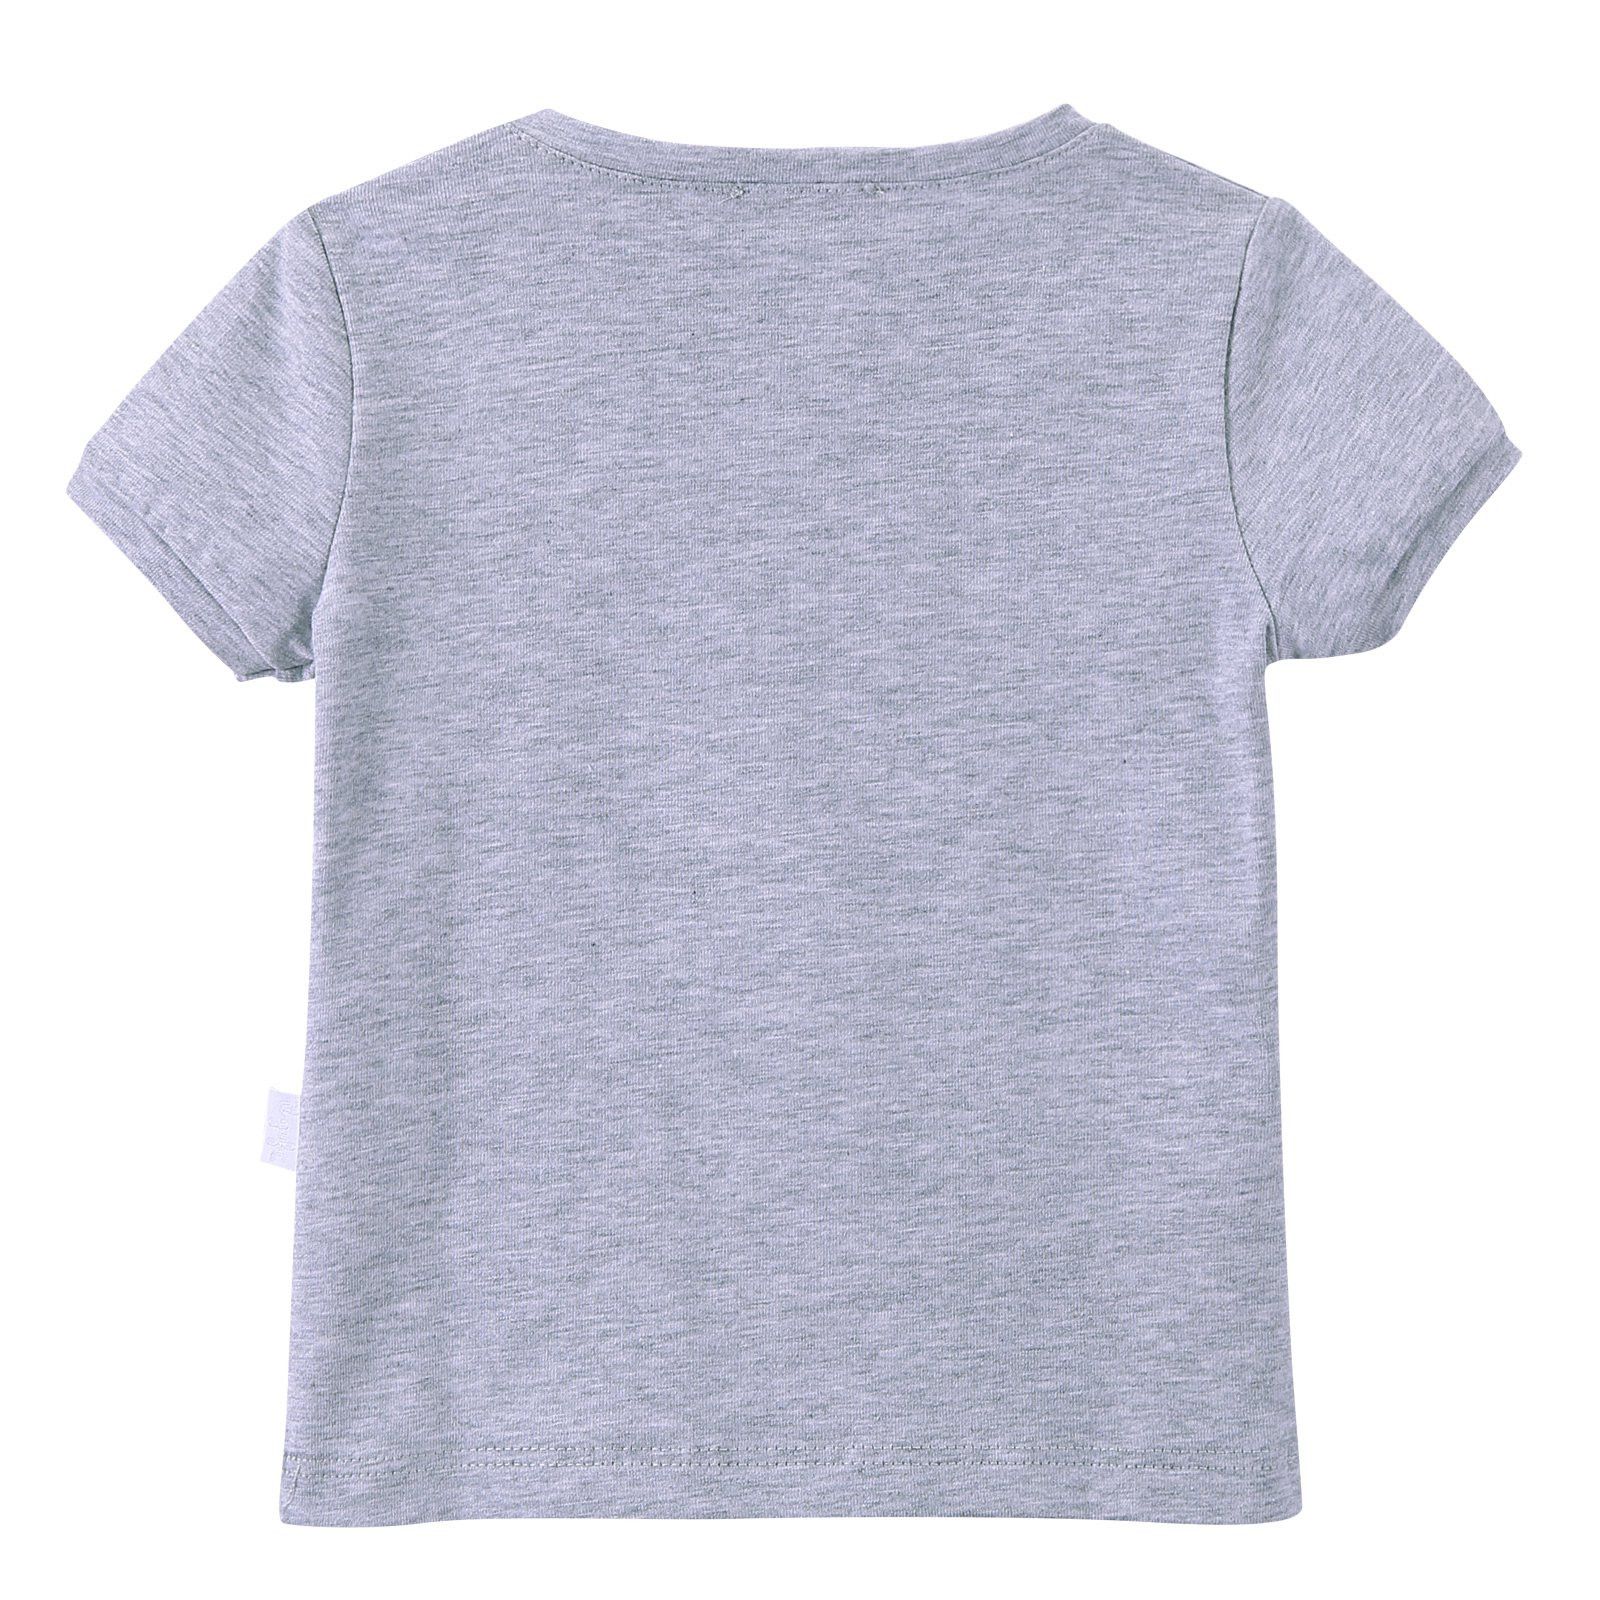 Girls Grey Fairy Printed T-Shirt With Ribbed Cuffs - CÉMAROSE | Children's Fashion Store - 2